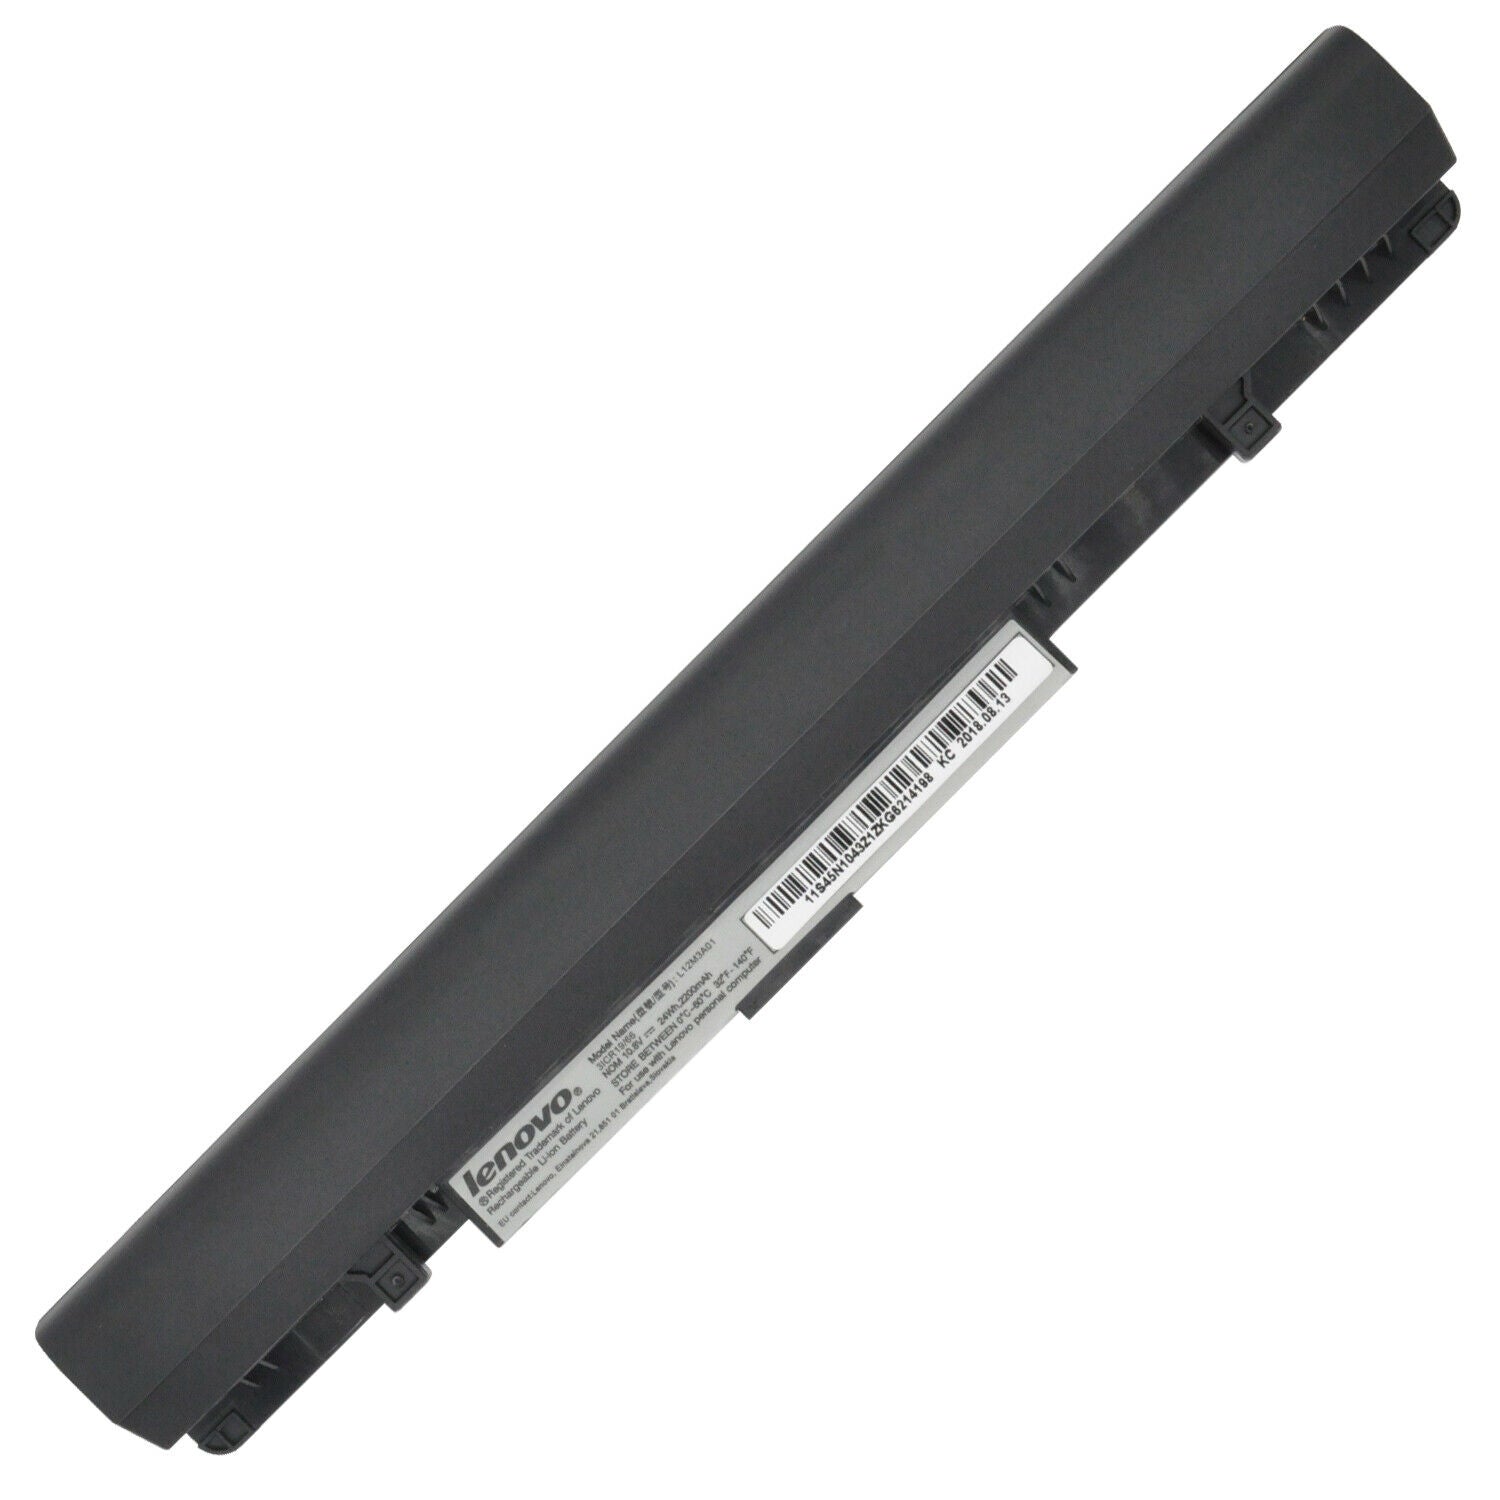 10.8V 36wh 3350mAh Original Laptop Battery L12M3A01 L12S3F01 L12C3A01 compatible with Lenovo IdeaPad S20-30 S210 S215 S210T Series